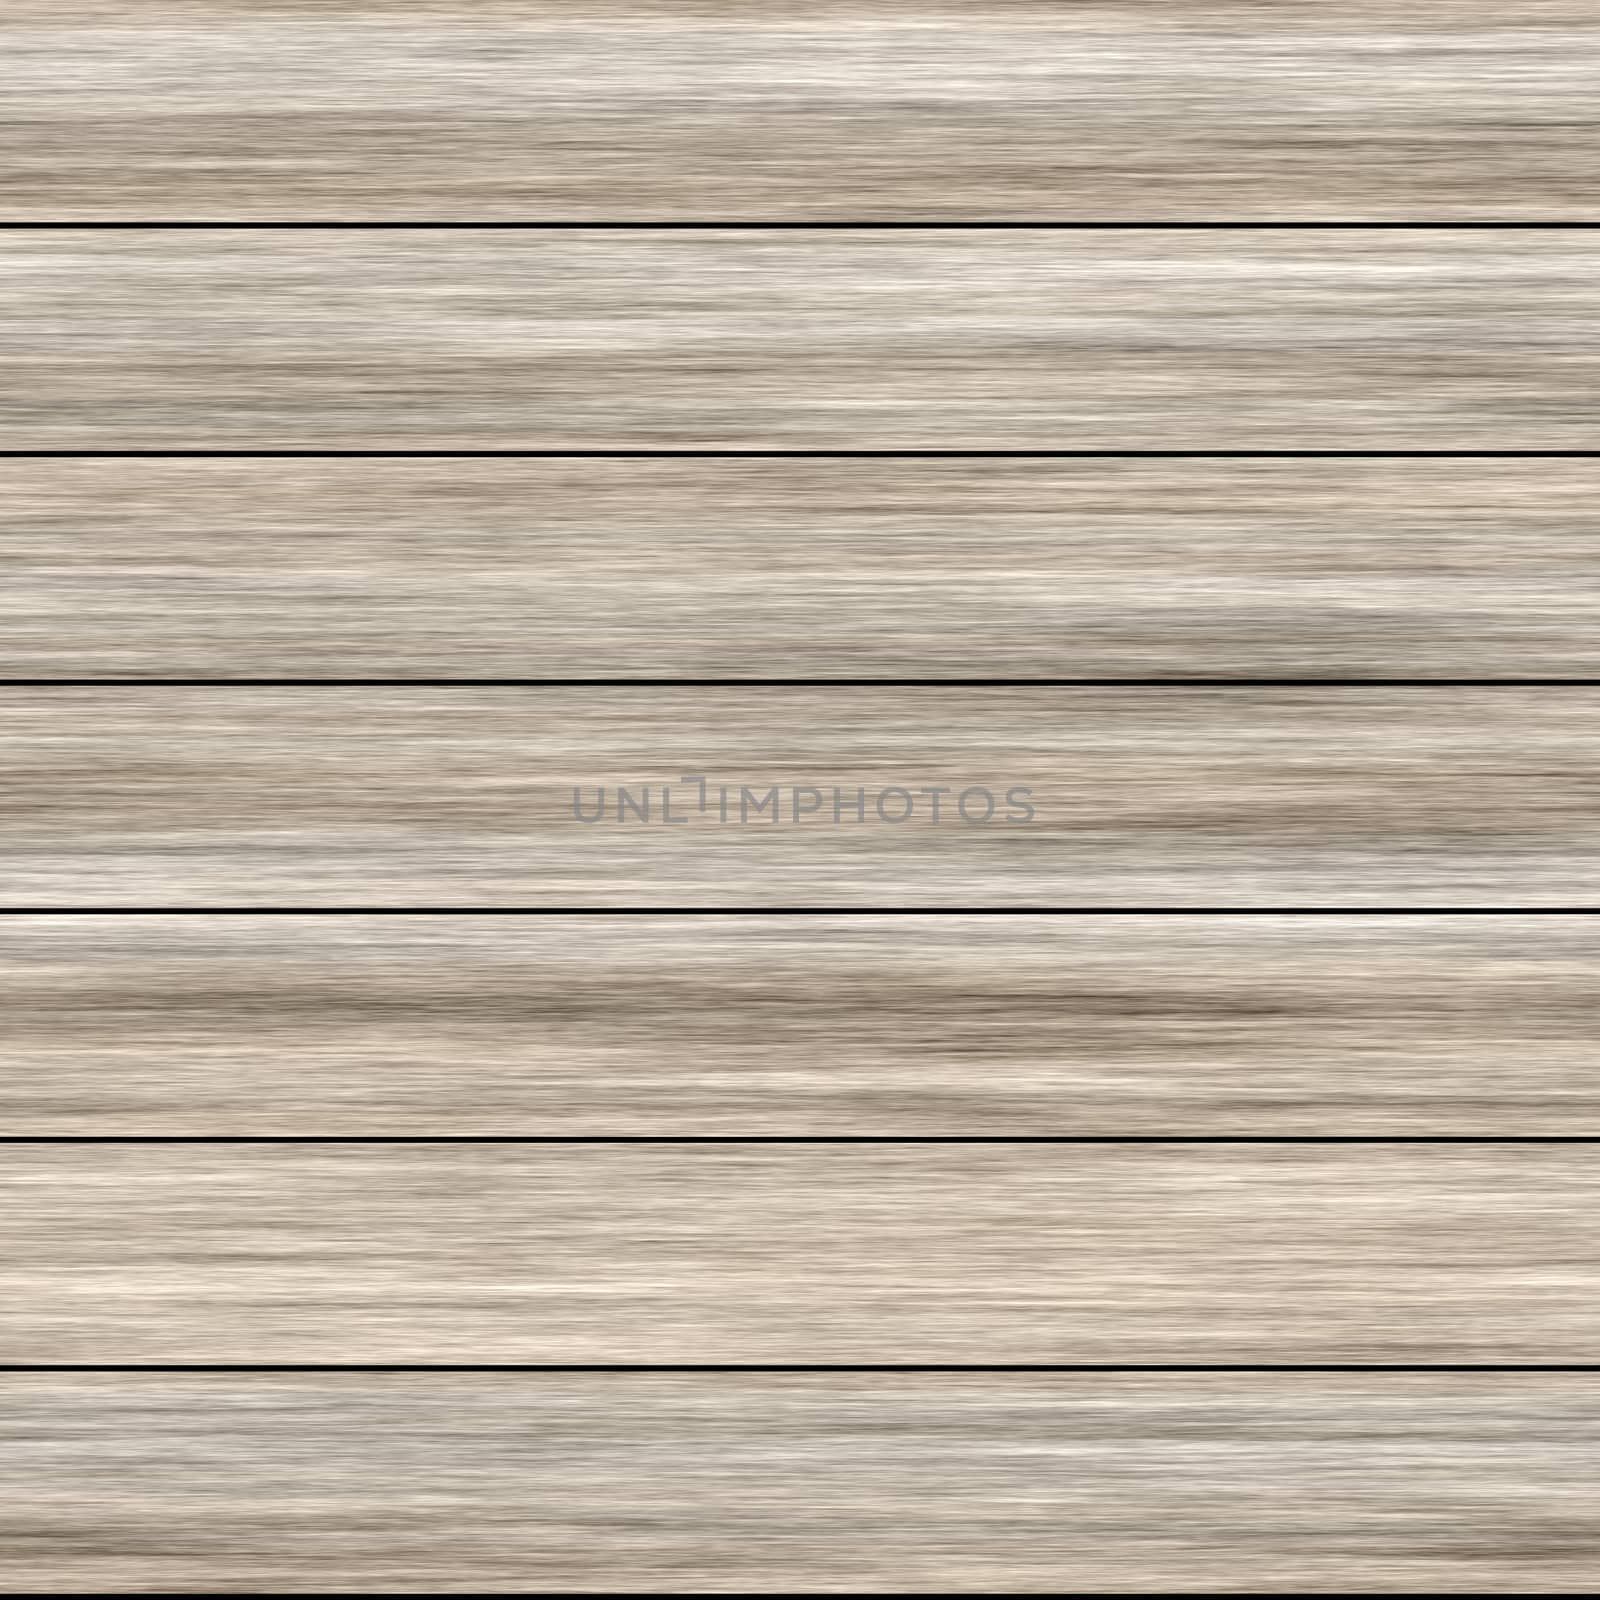 An image of a beautiful wooden planks seamless texture background